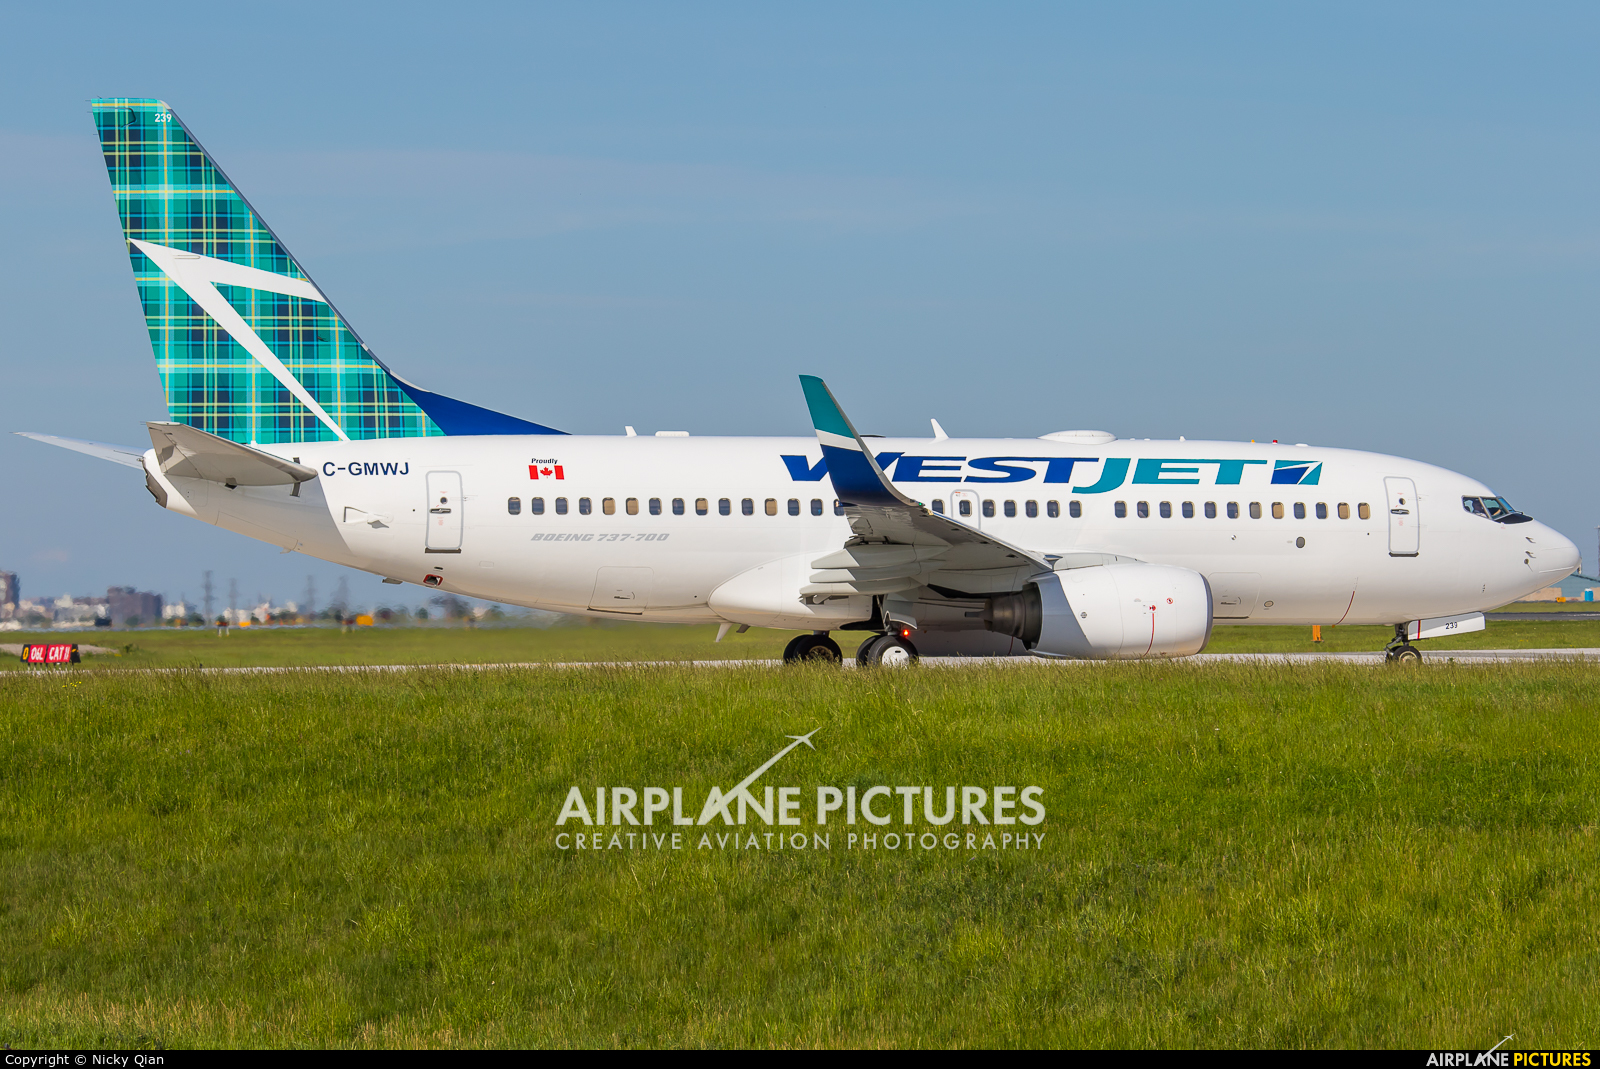 WestJet Airlines C-GMWJ aircraft at Toronto - Pearson Intl, ON